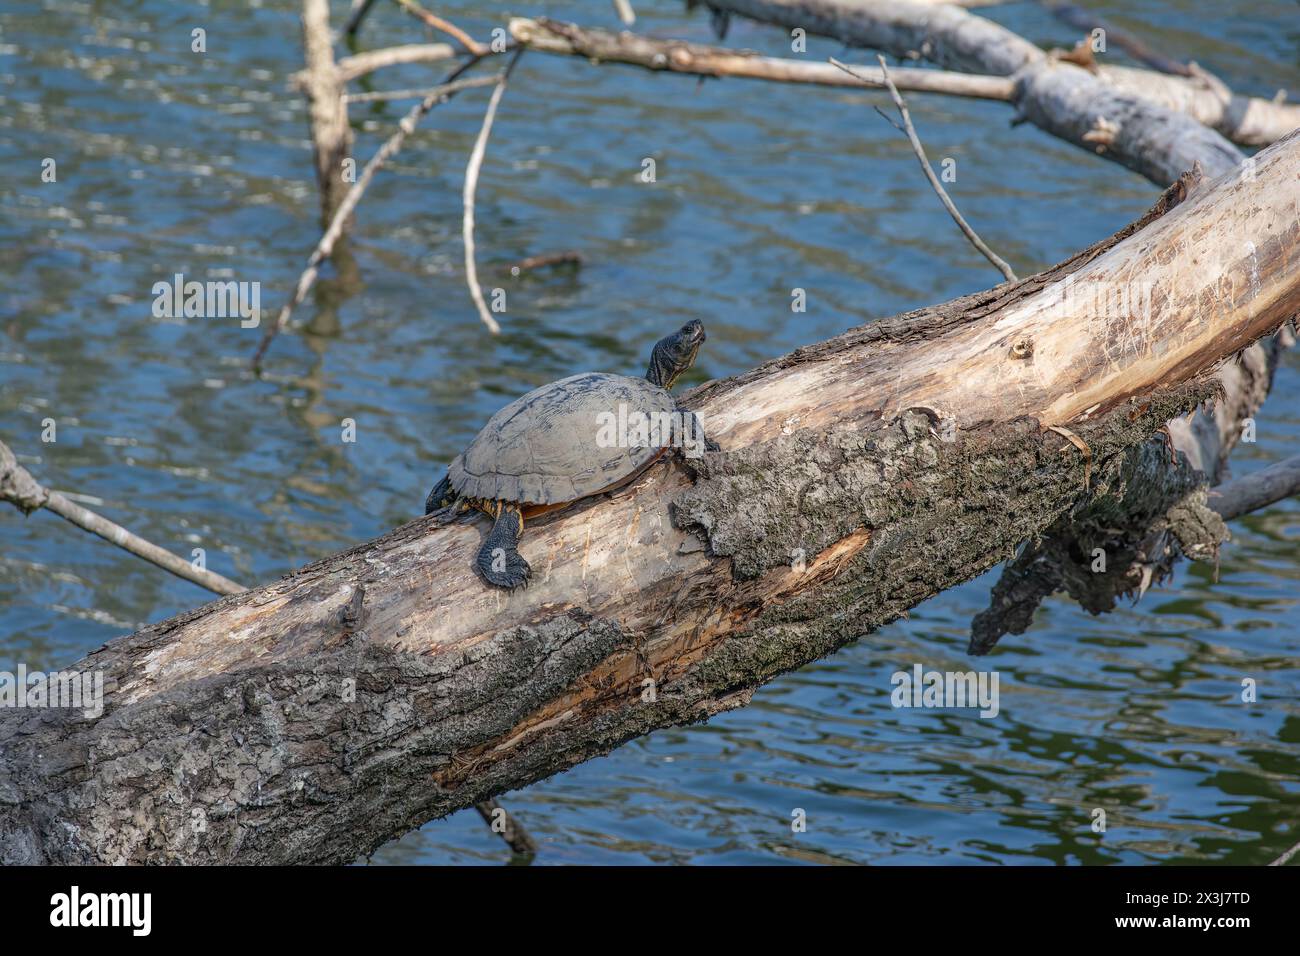 turtle takes the first sunbath in April after hibernation,lower Rhine region,Germany Stock Photo